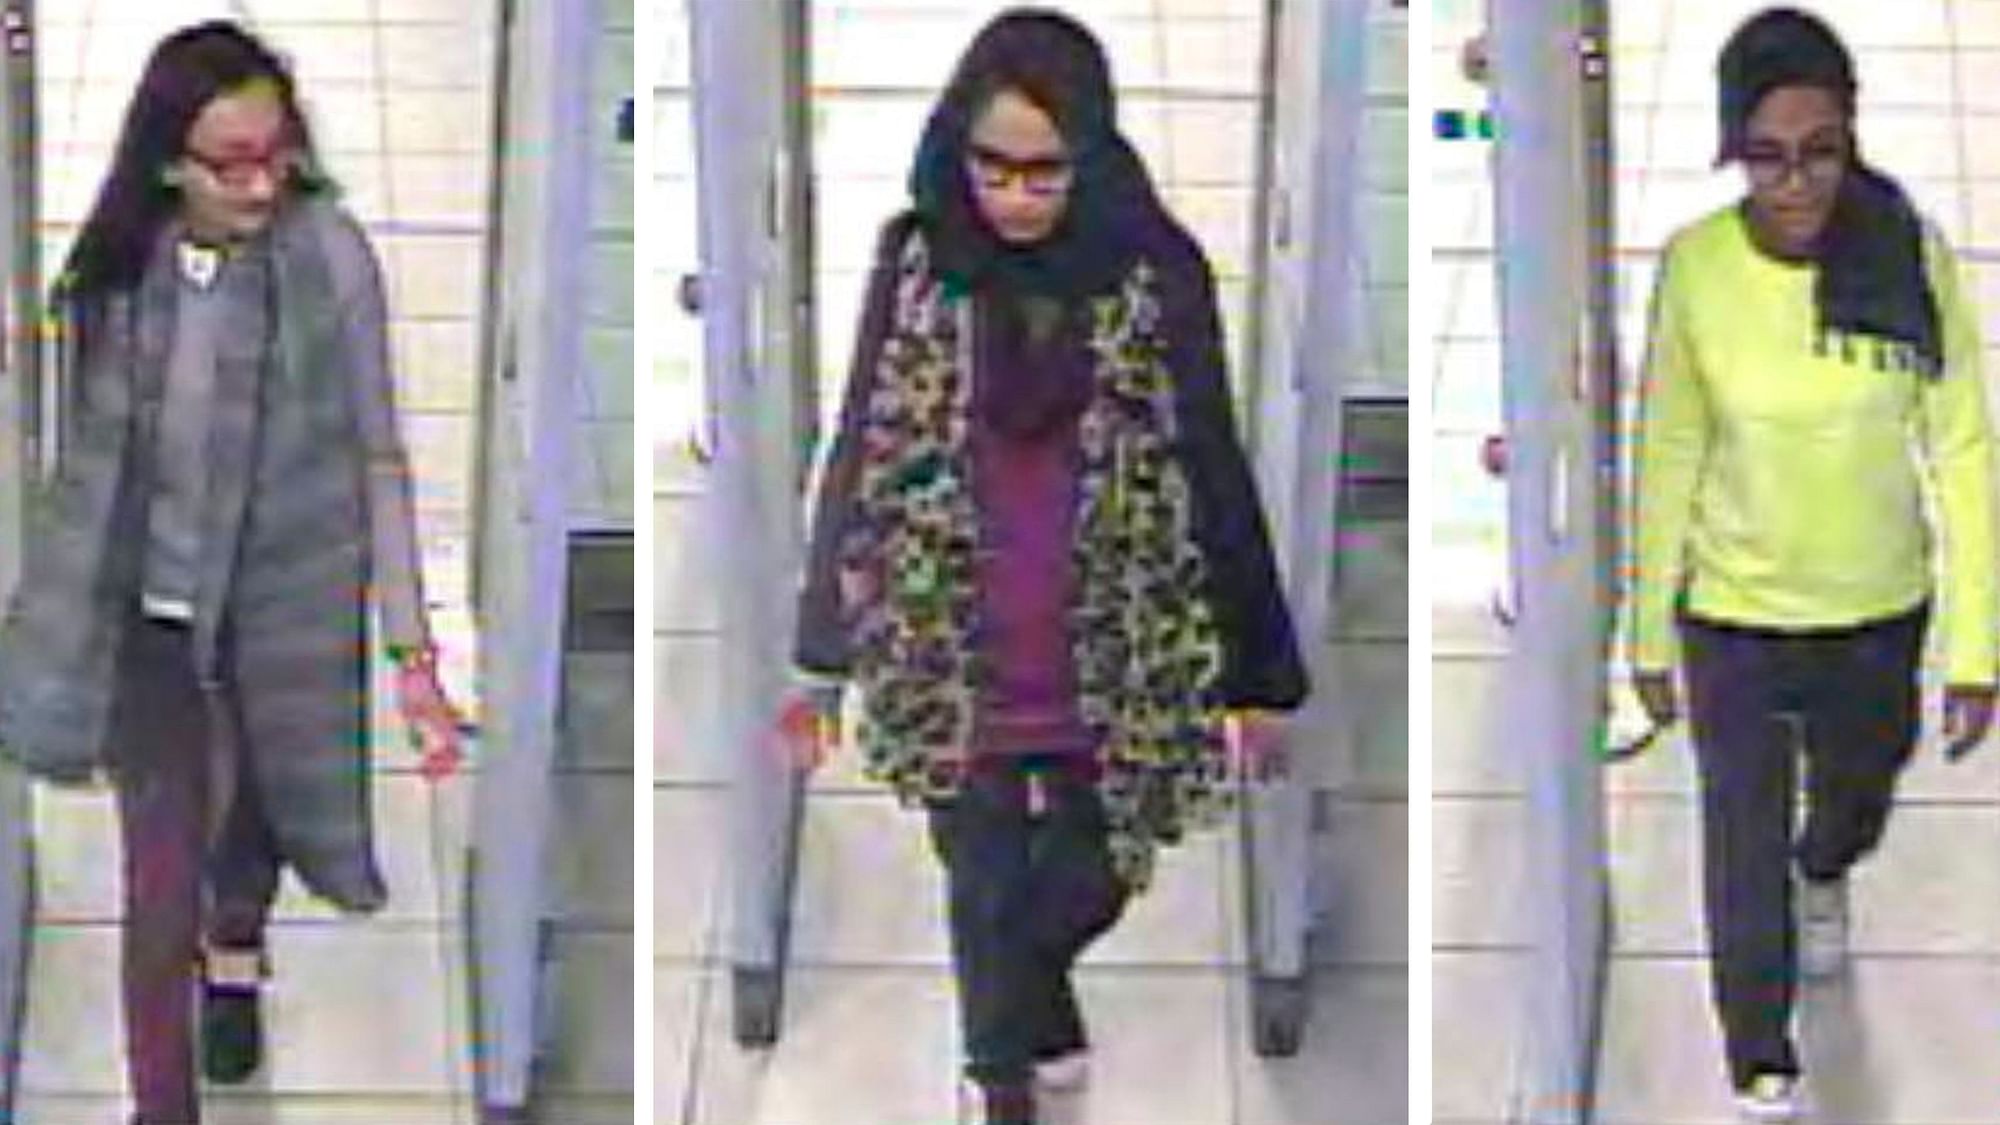 CCTV footage shows Shamima Begum (centre) and two other girls going through security before catching their flight to Turkey.